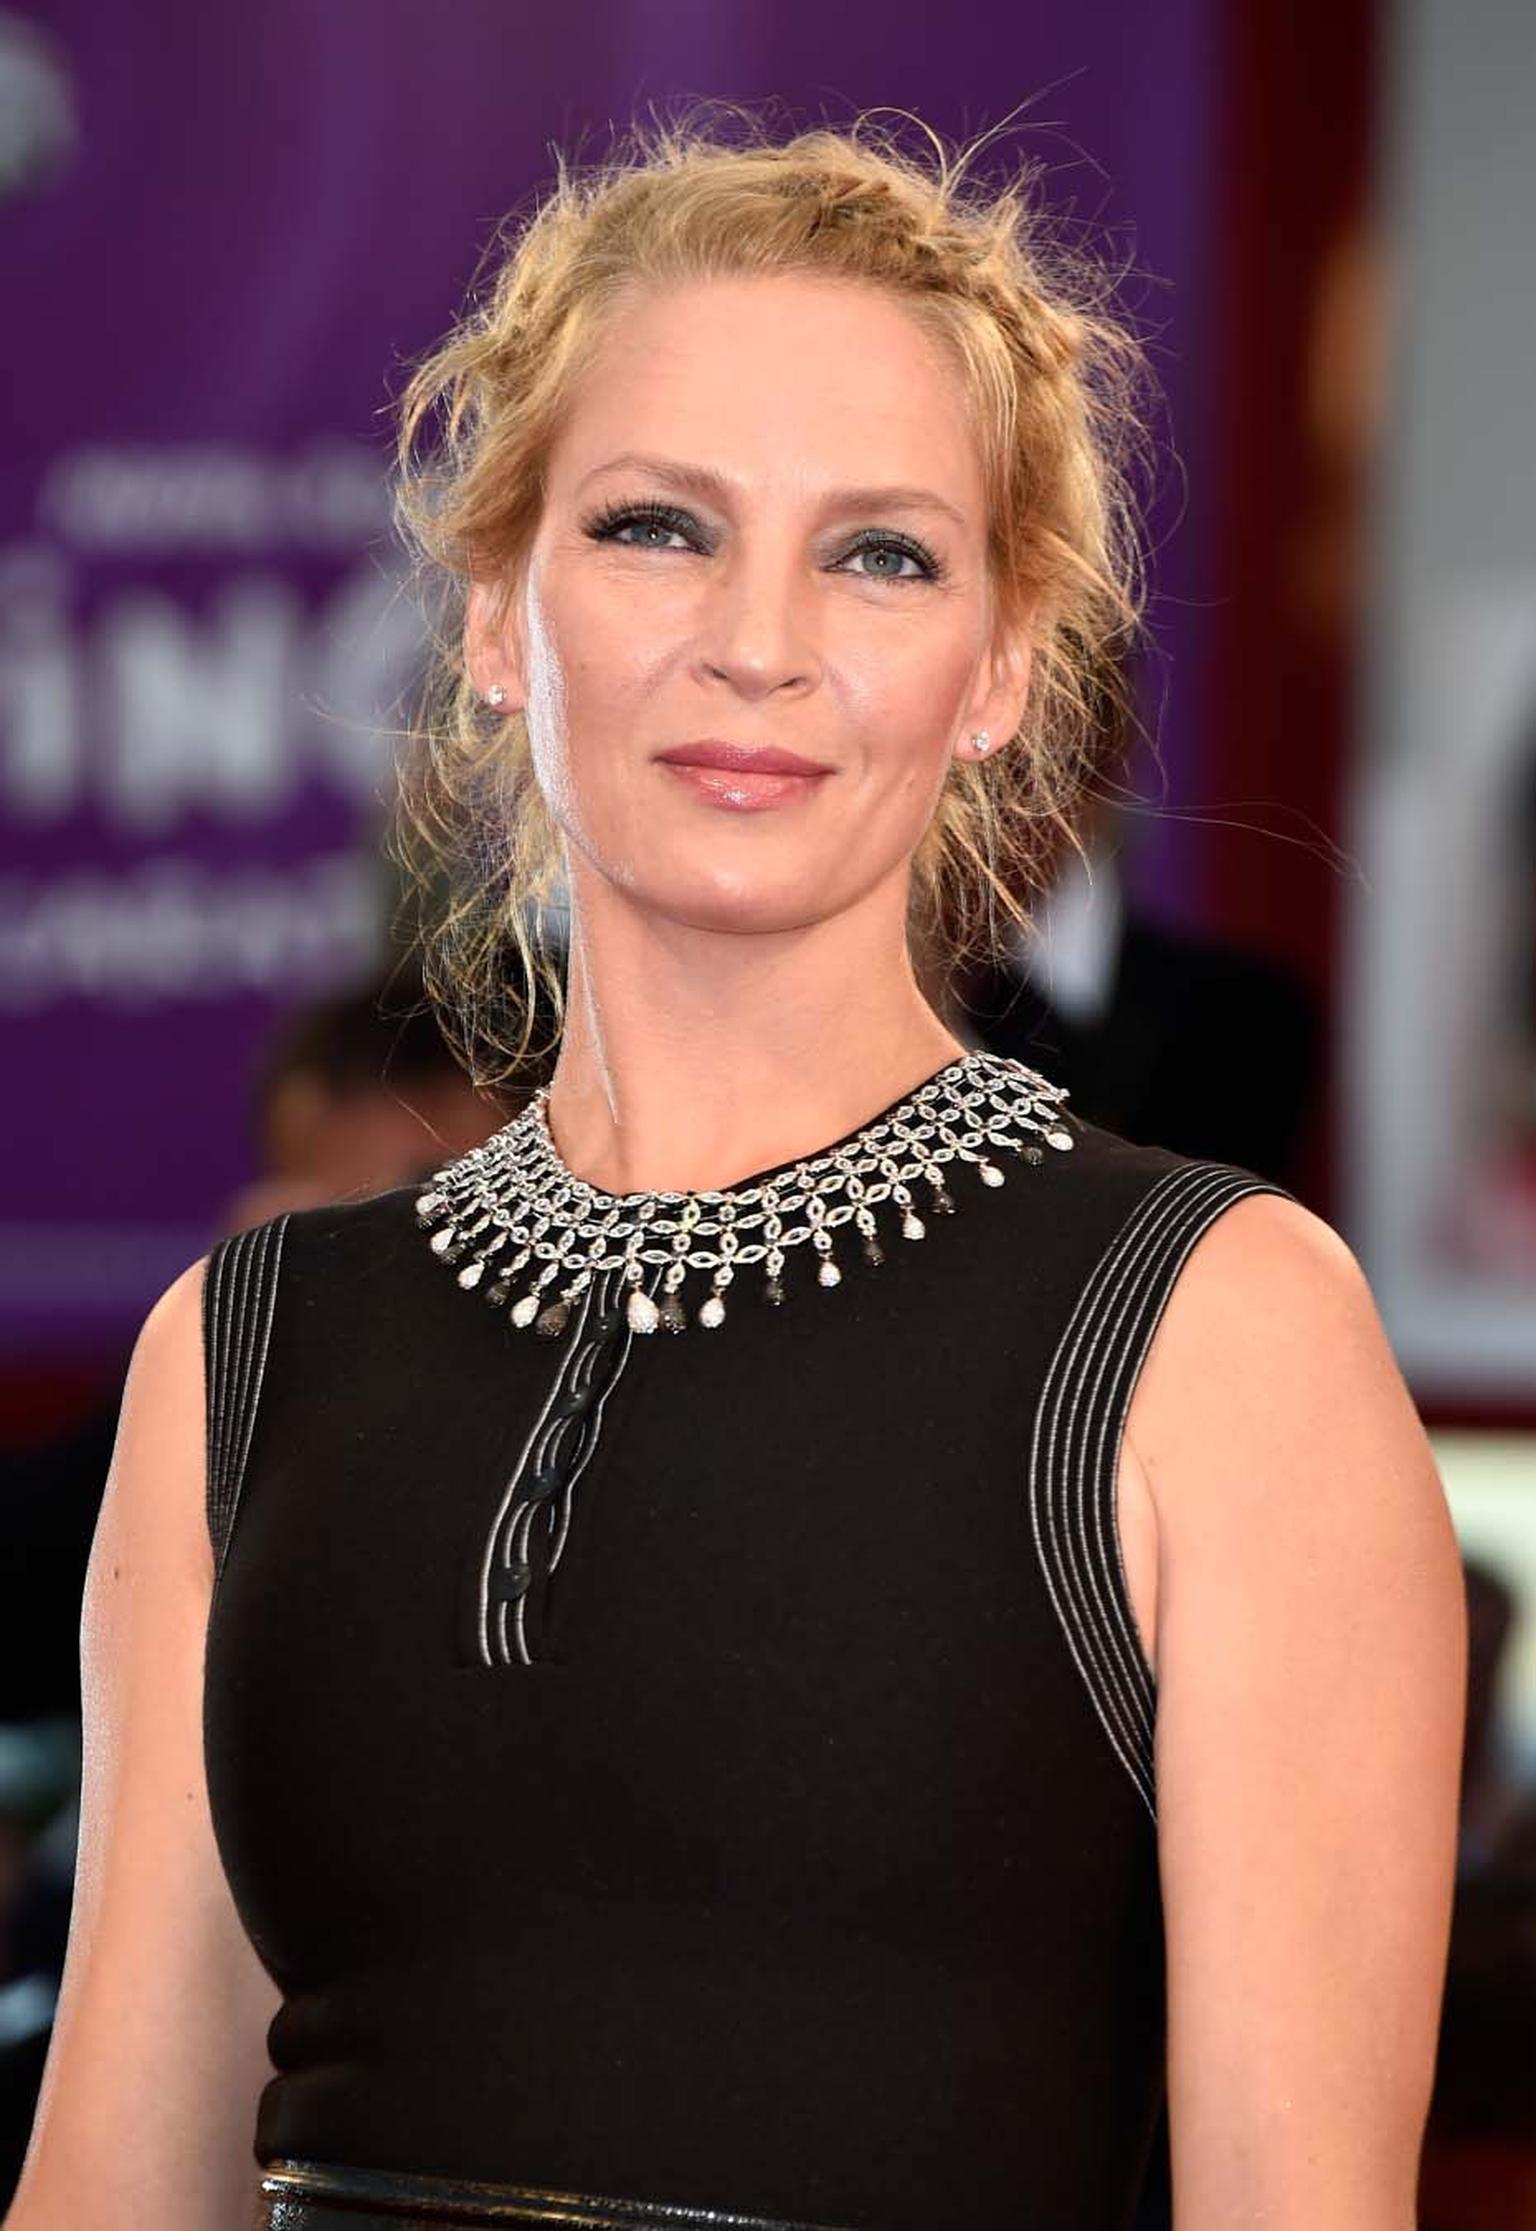 American actress Uma Thurman wore a pair of diamond stud earrings, a bracelet set with 36ct of fancy-cut diamonds, diamond earrings worn in her hair and a necklace from the Chopard High Jewellery Collection set with 12ct of black diamonds and 20ct of bril